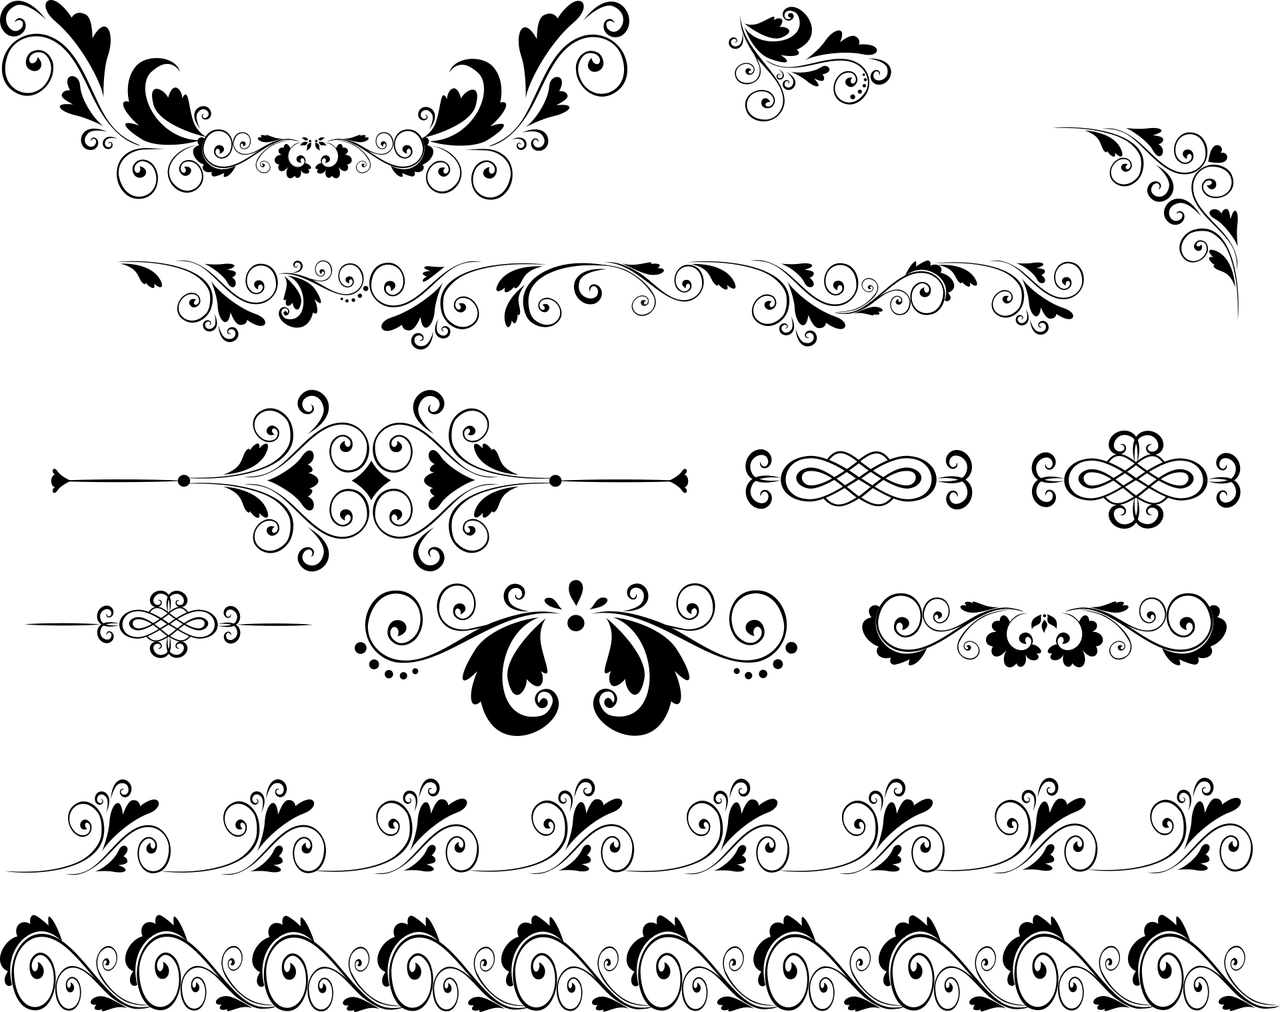 a person is flying a kite in the dark, by Taro Yamamoto, featured on unsplash, postminimalism, phone wallpaper hd, black glossy xenomorph, snapchat story screenshot, (empty black void)